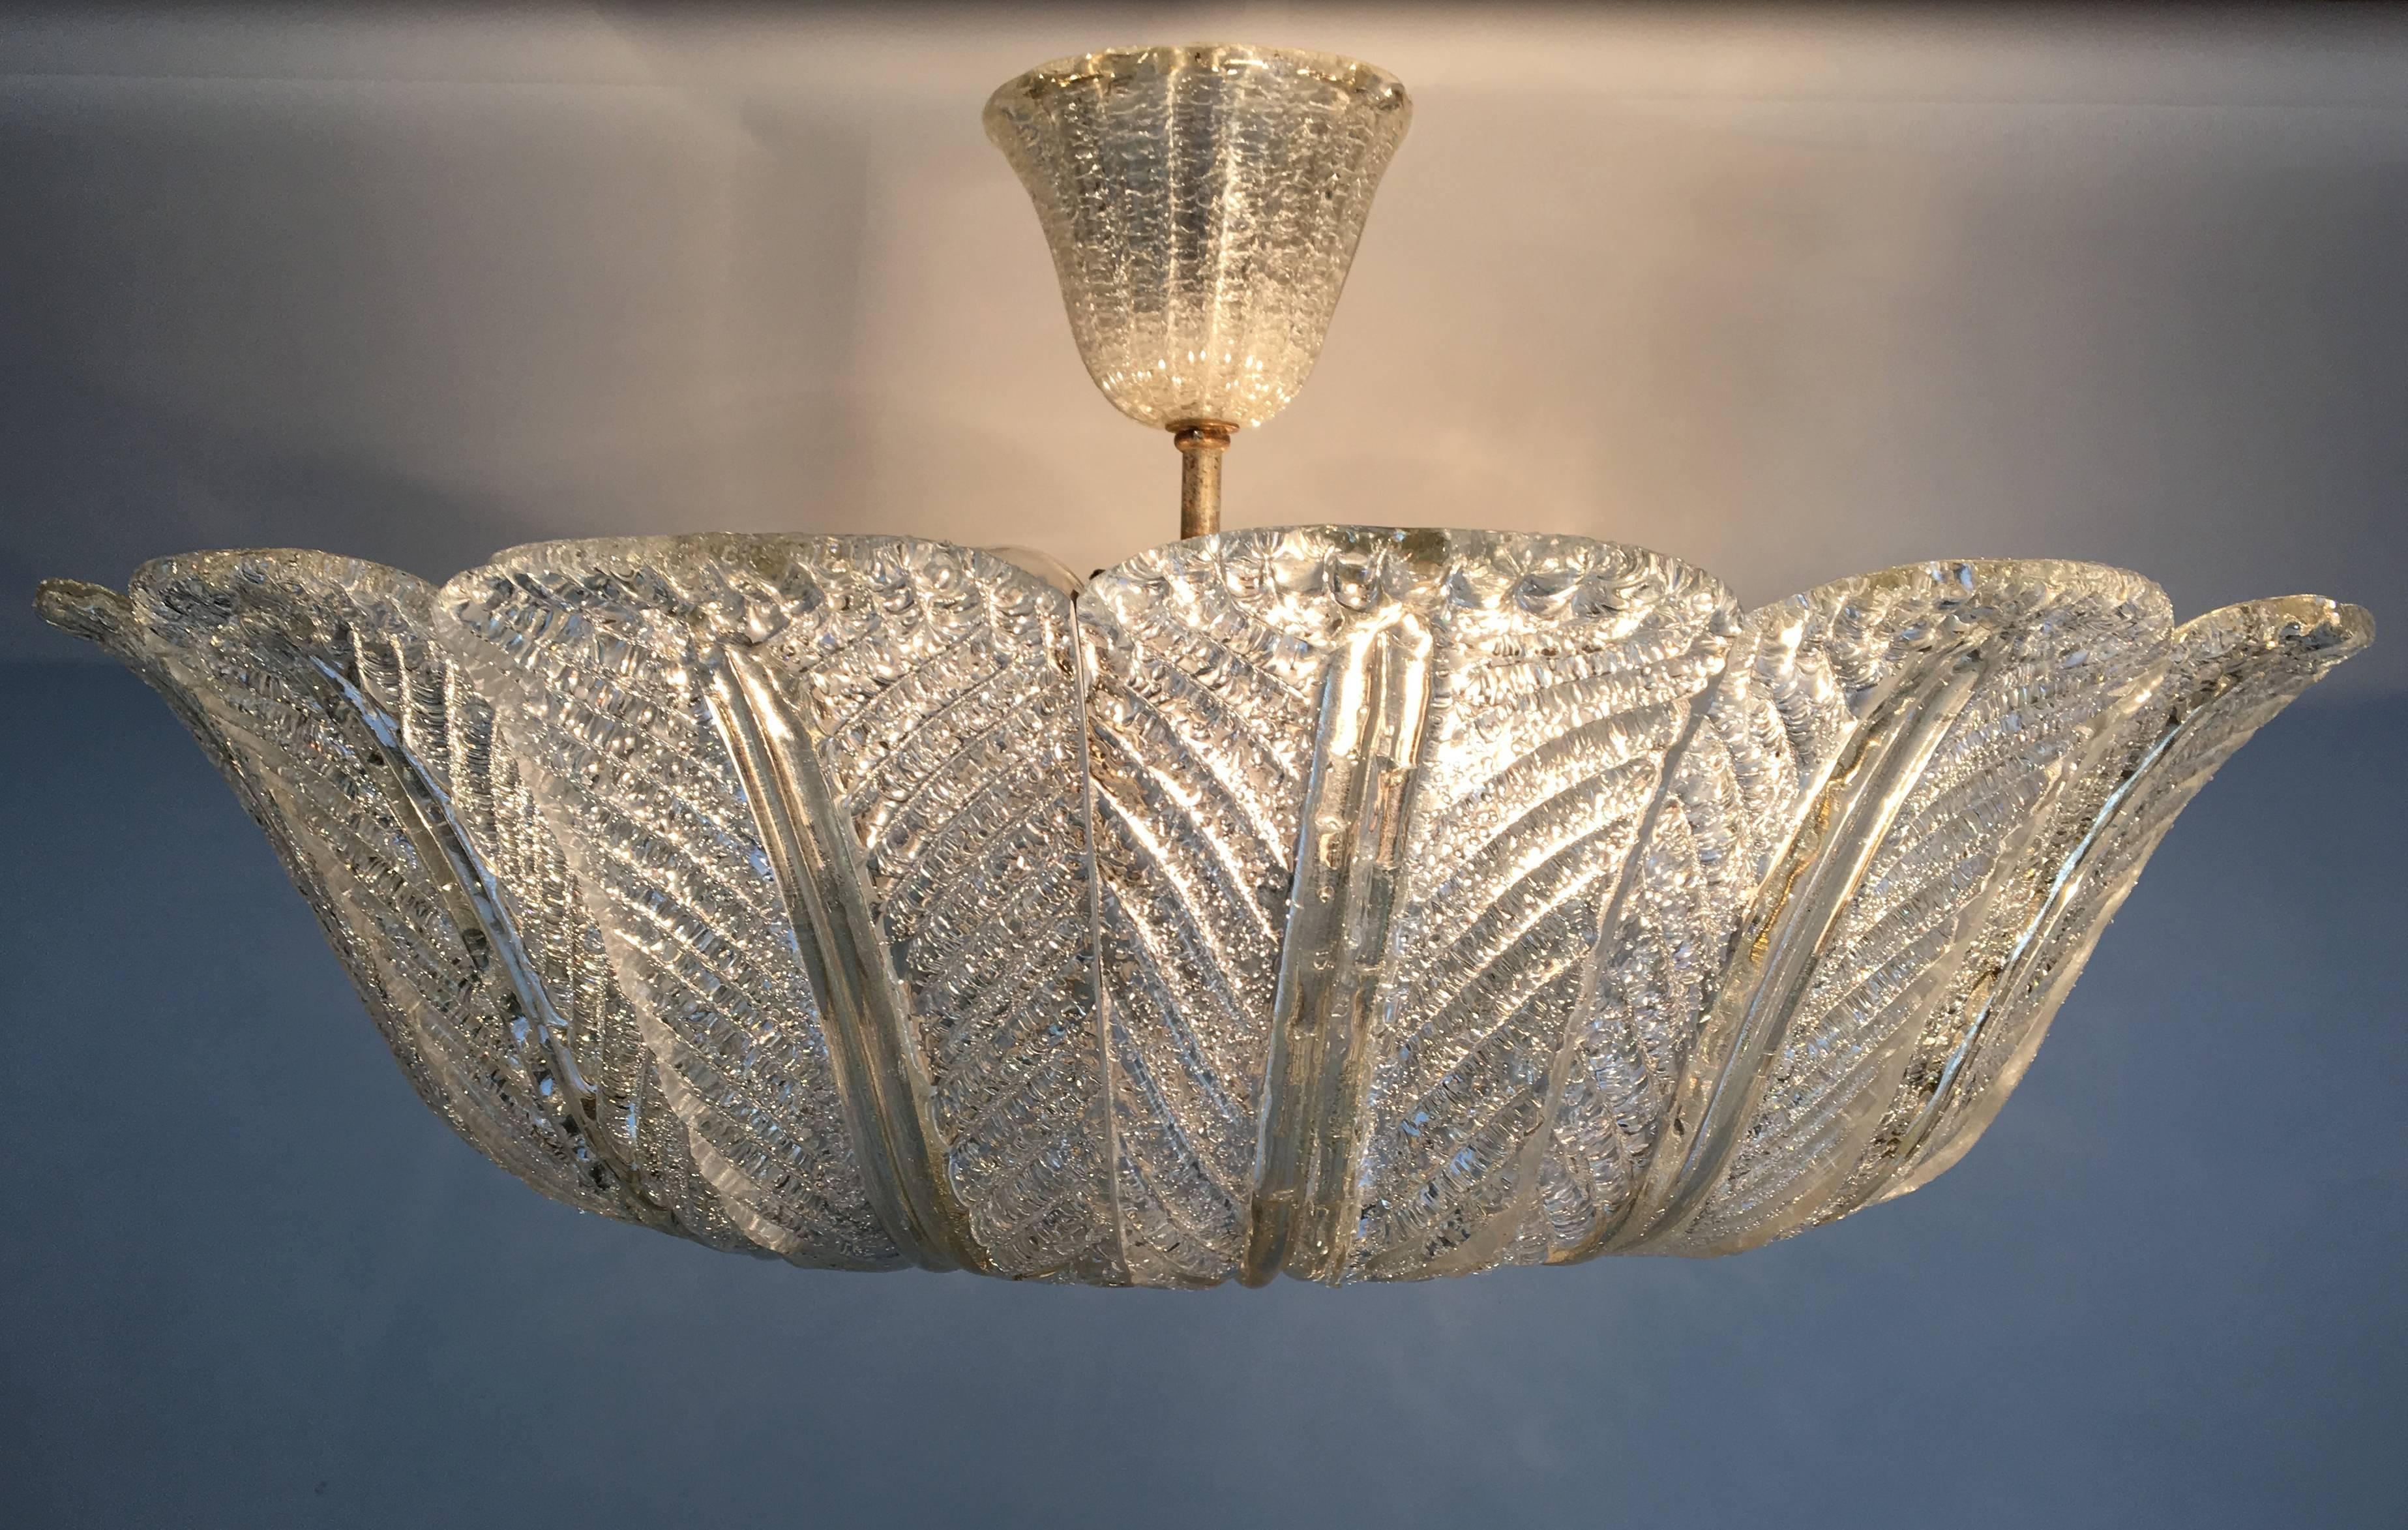 A glass ceiling fixture consisting of multiple panels of textured glass hung around a textured glass disk with brass hardware and glass canopy by Venini.

Italian, circa 1950s.